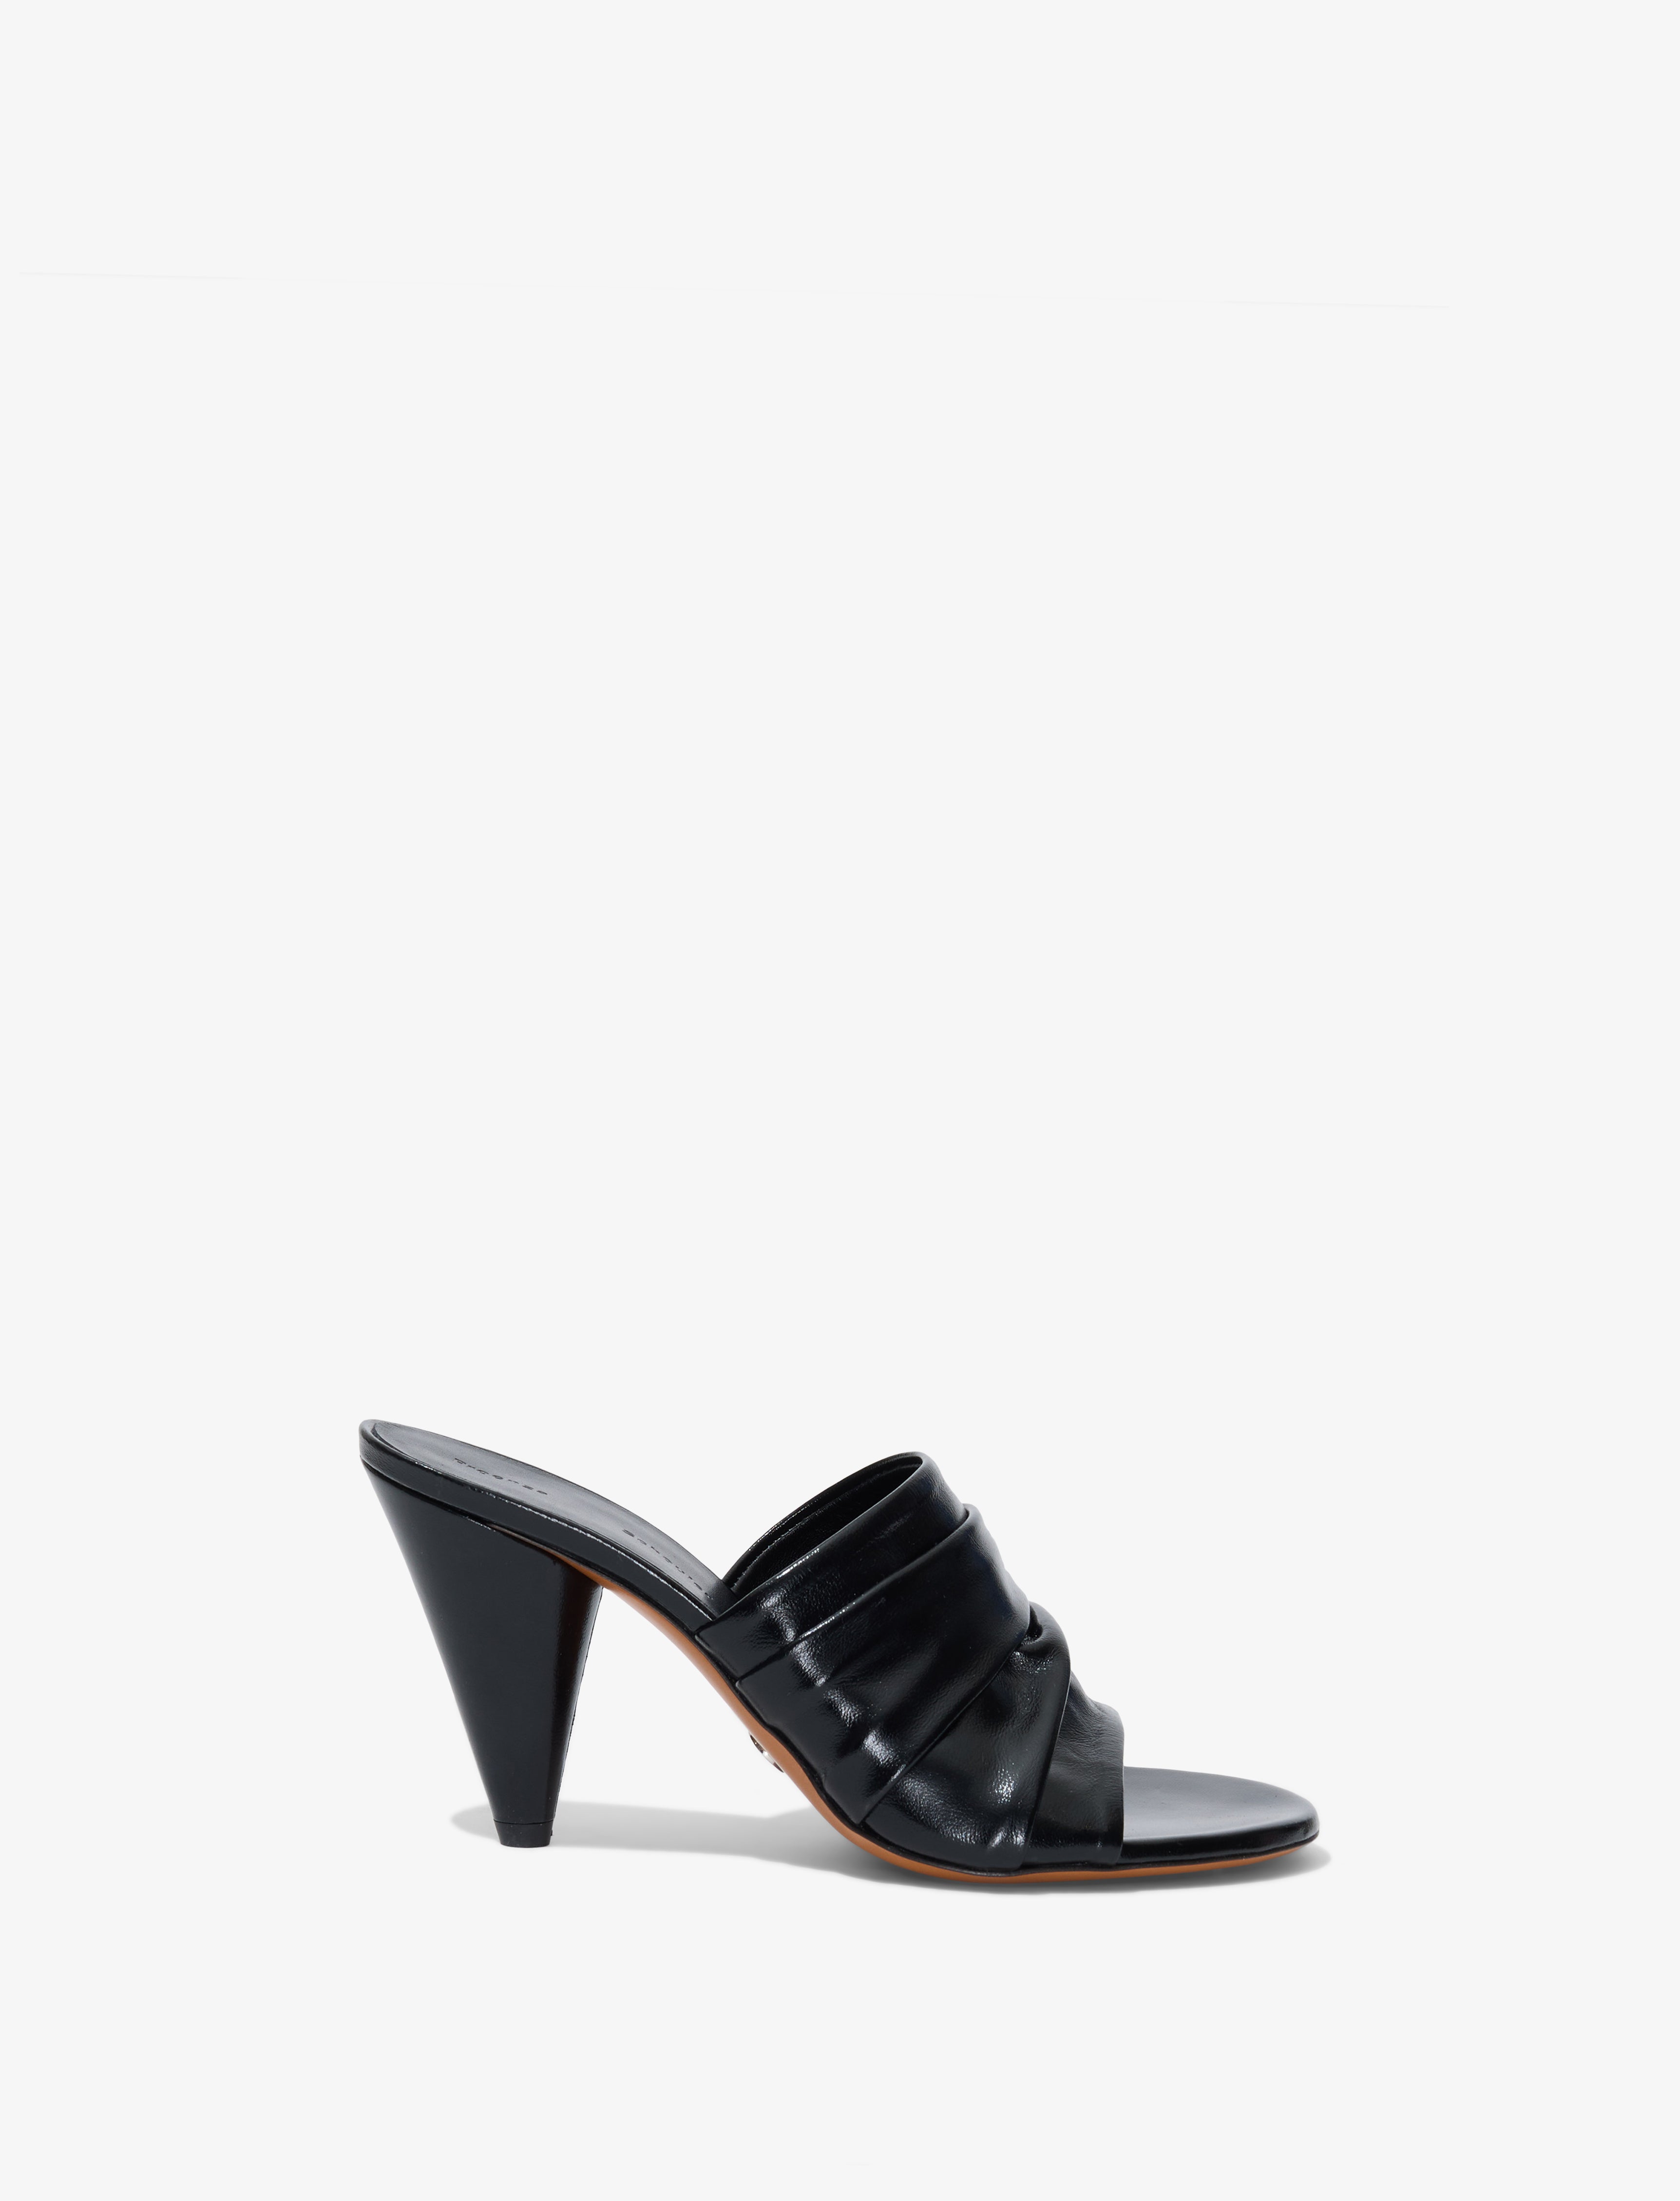 Shop Mules and Slip-Ons | Proenza Schouler - Official Site